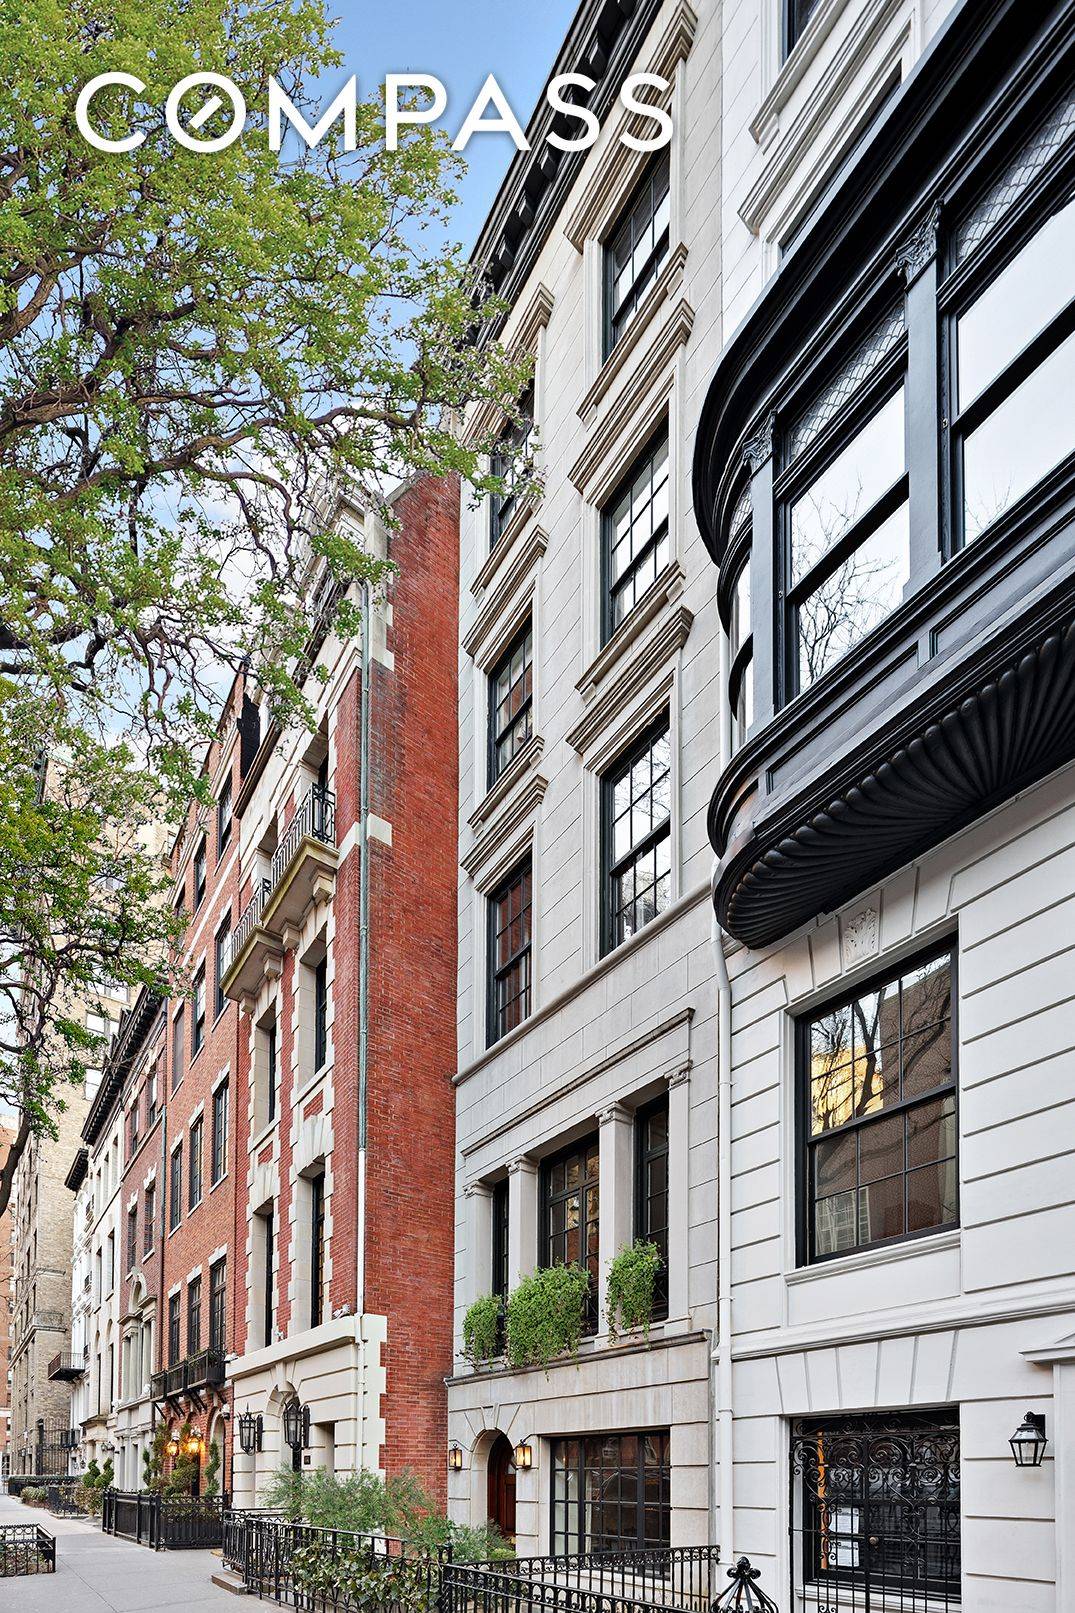 42 East 81st Street is a charming historic townhouse on one of the most coveted tree lined blocks of the Upper East Side.